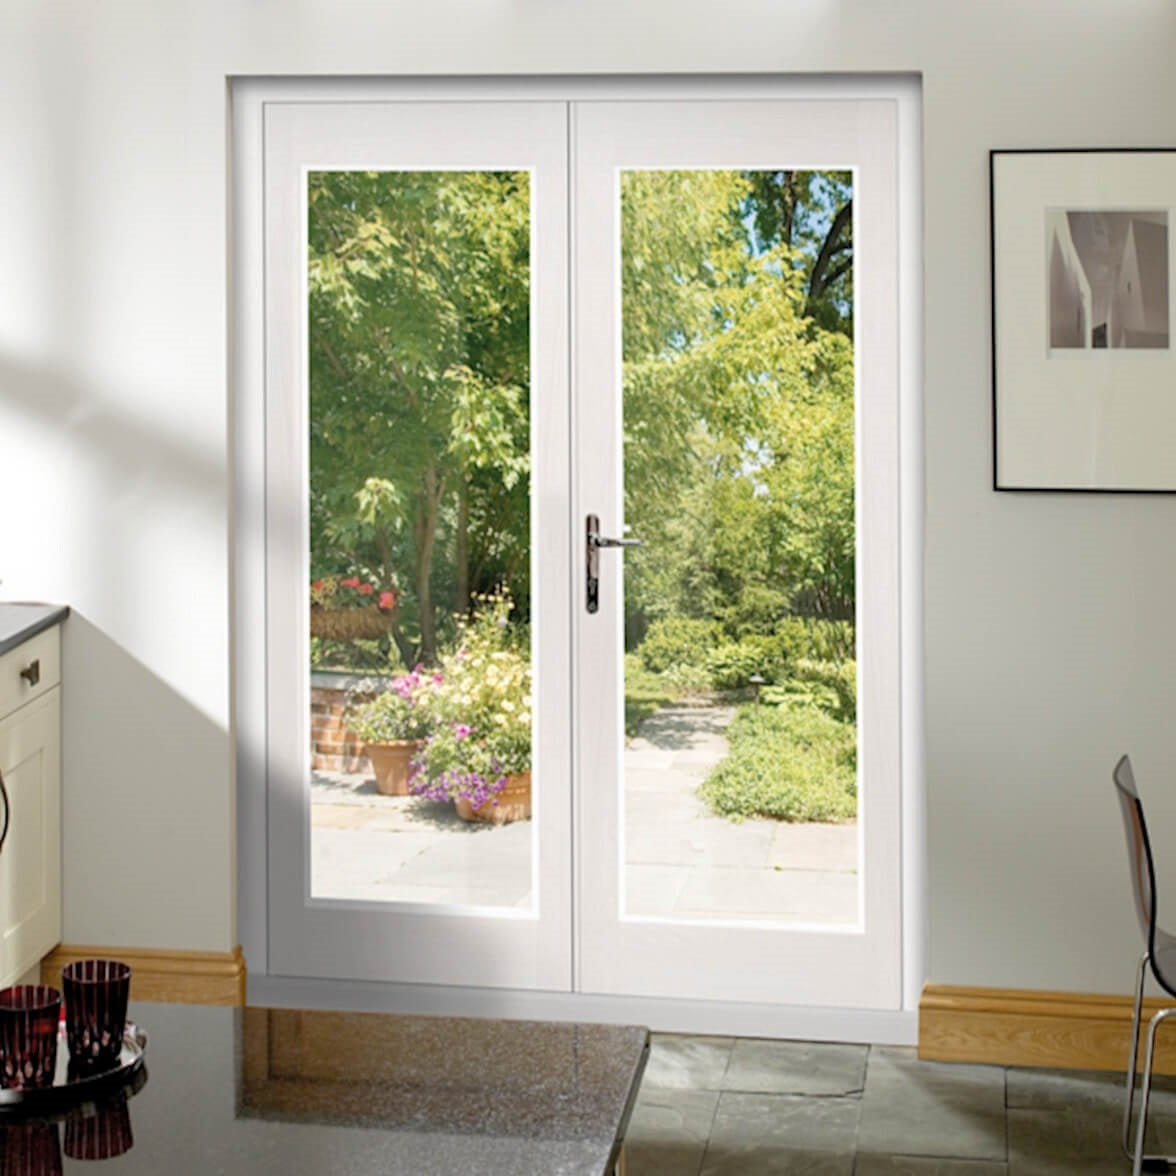 Standard Size of French Doors: A Complete Guide – Emerald Doors